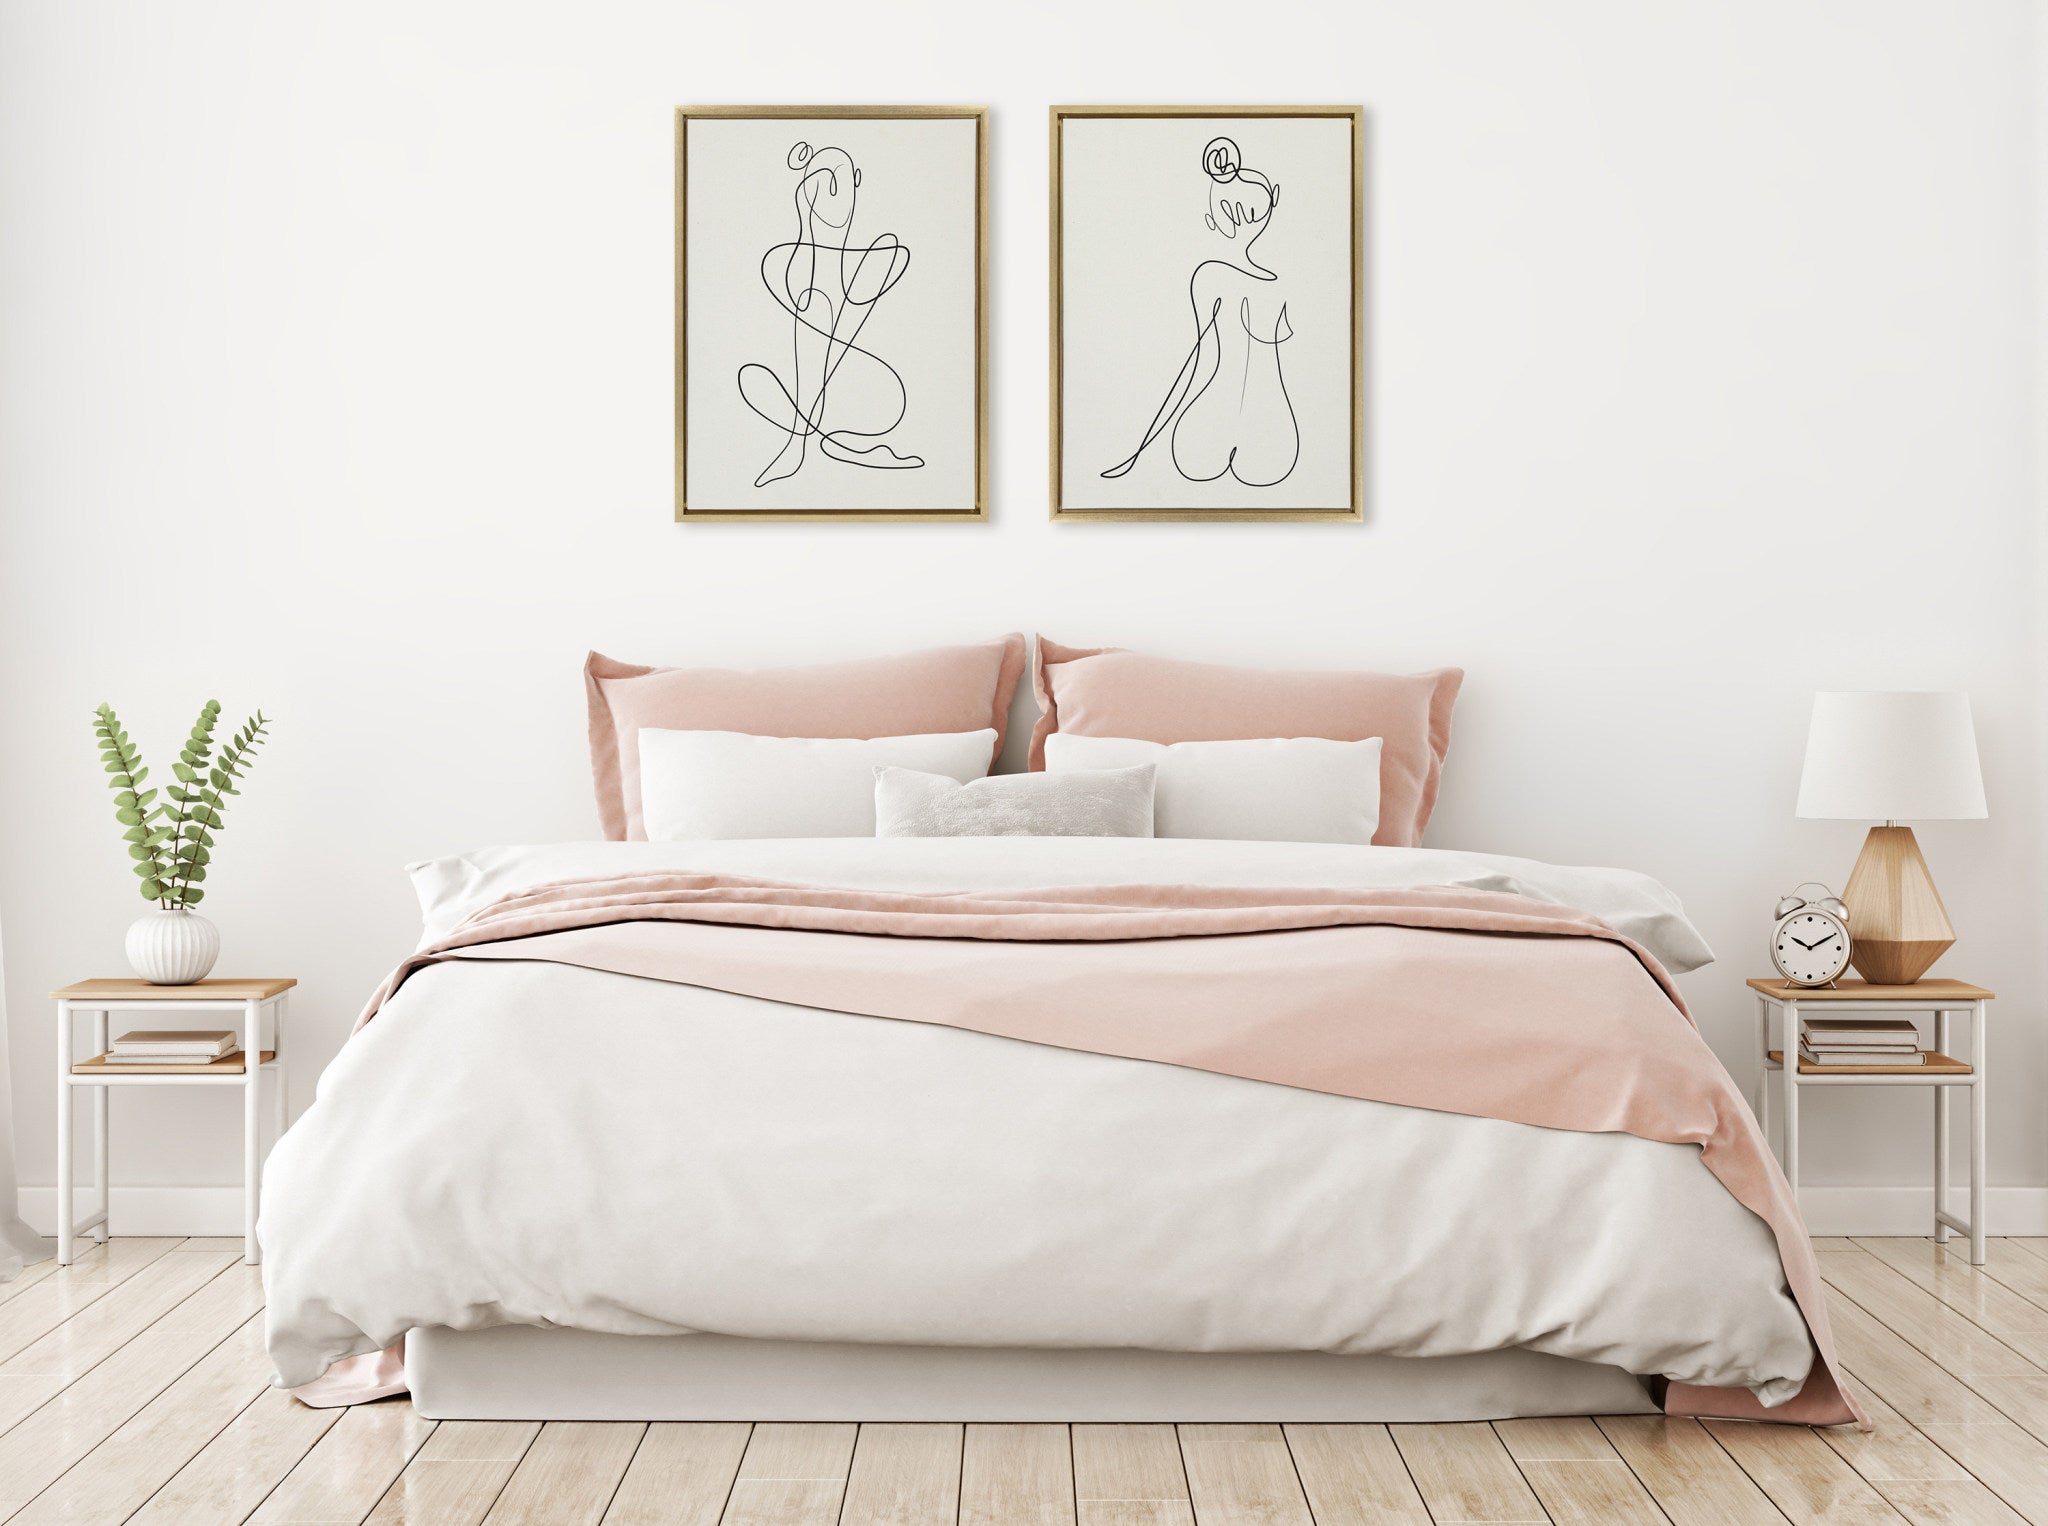 Sylvie Thinking of You Line Art and Sitting Beauty Framed Canvas Set by Rachel Lee of My Dream Wall